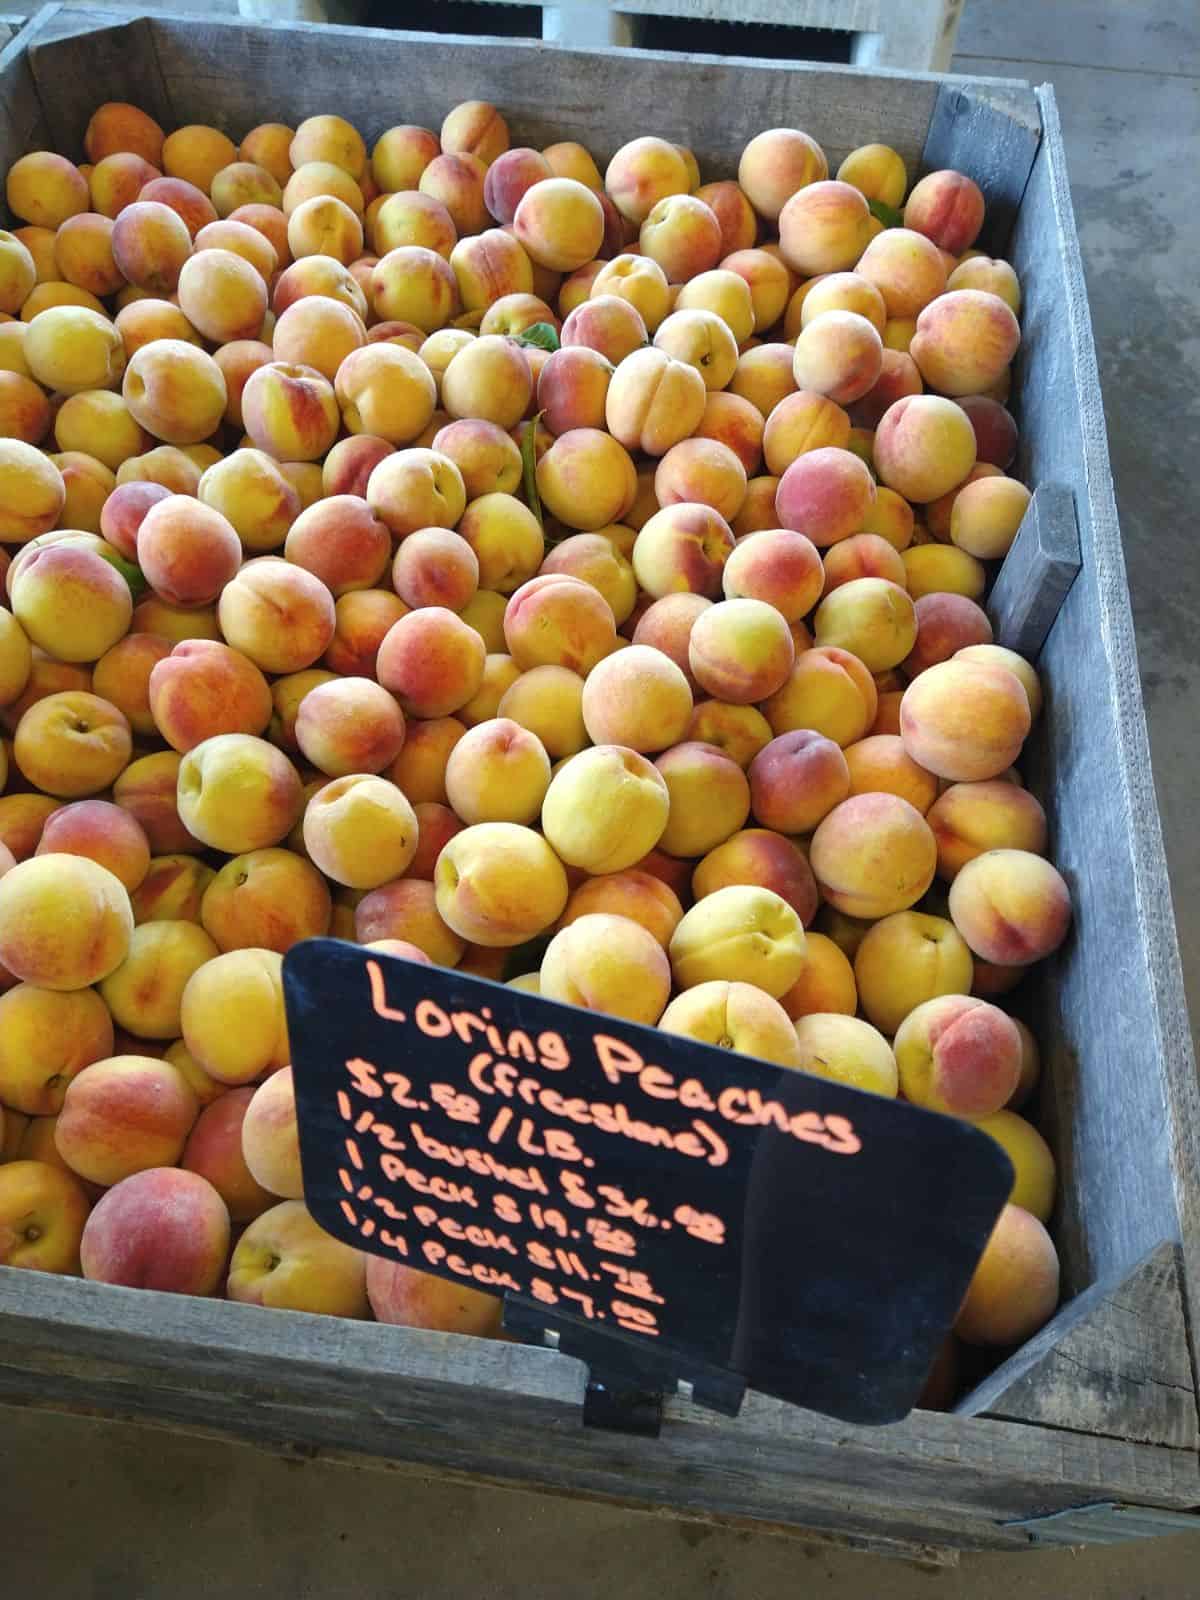 A bin of Loring peaches with a sign showing the prices.